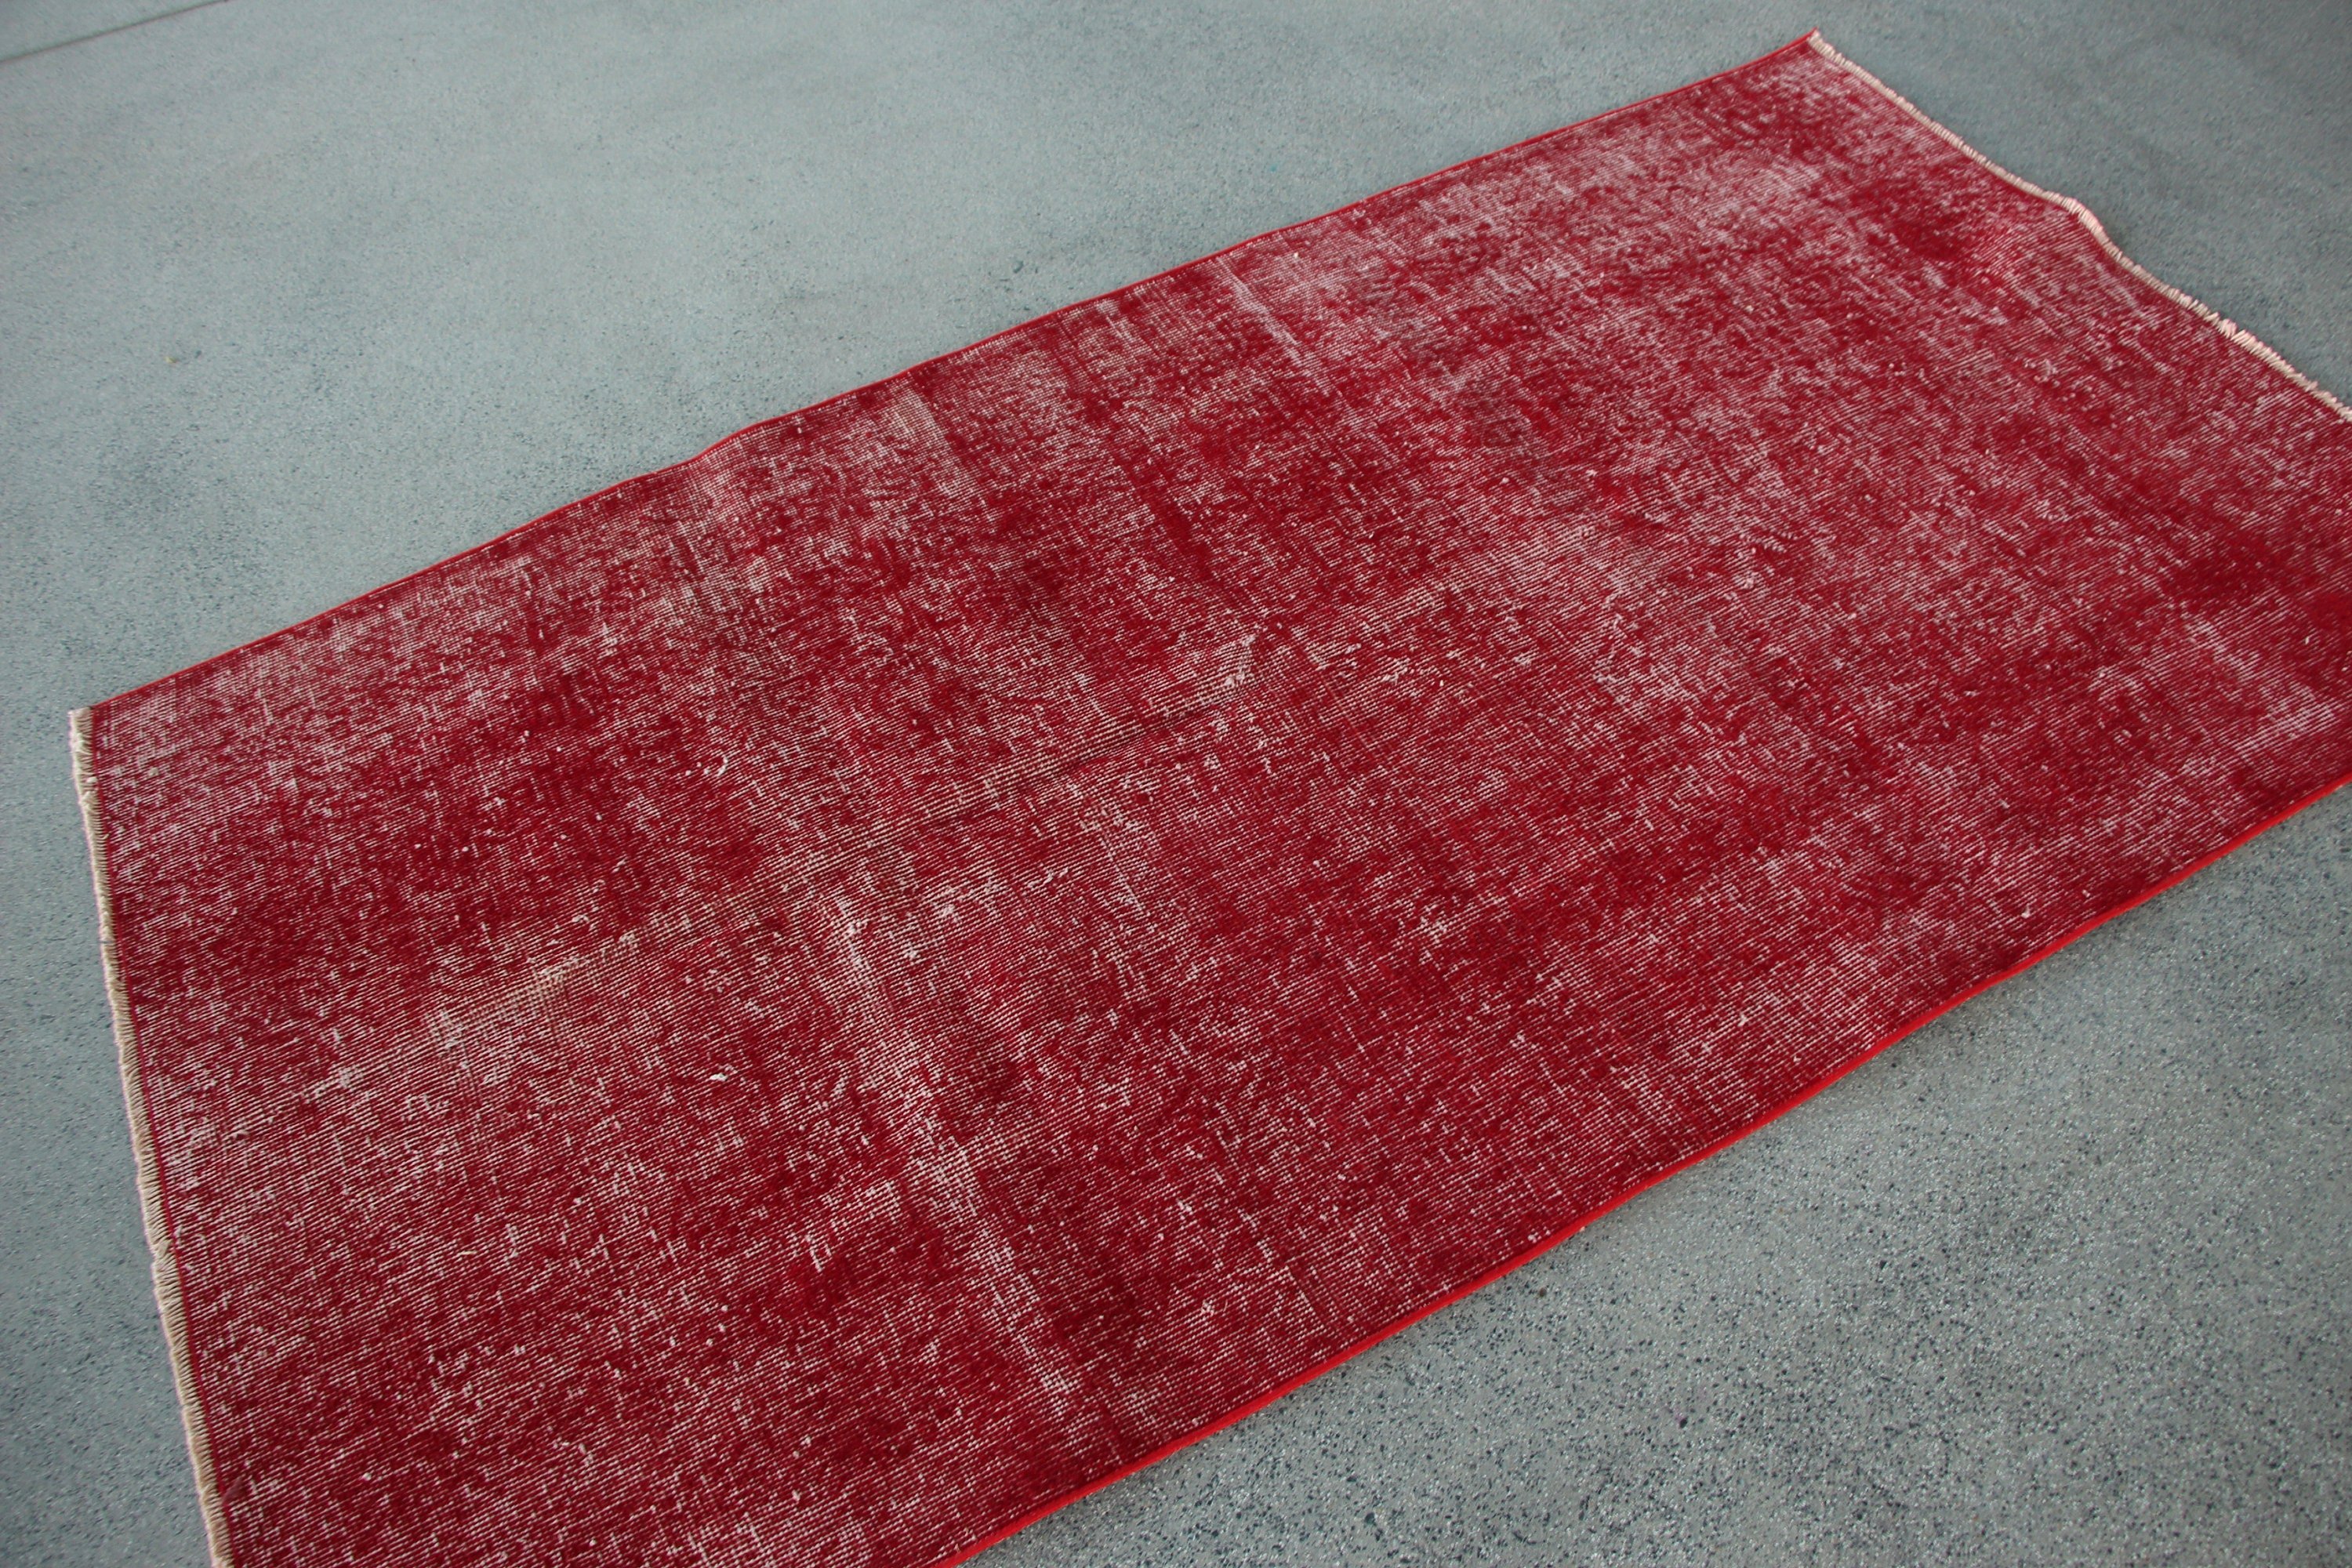 Wool Rug, Rugs for Area, Floor Rugs, Kitchen Rugs, 3.7x6.8 ft Area Rug, Vintage Rug, Red Anatolian Rugs, Turkish Rug, Home Decor Rugs